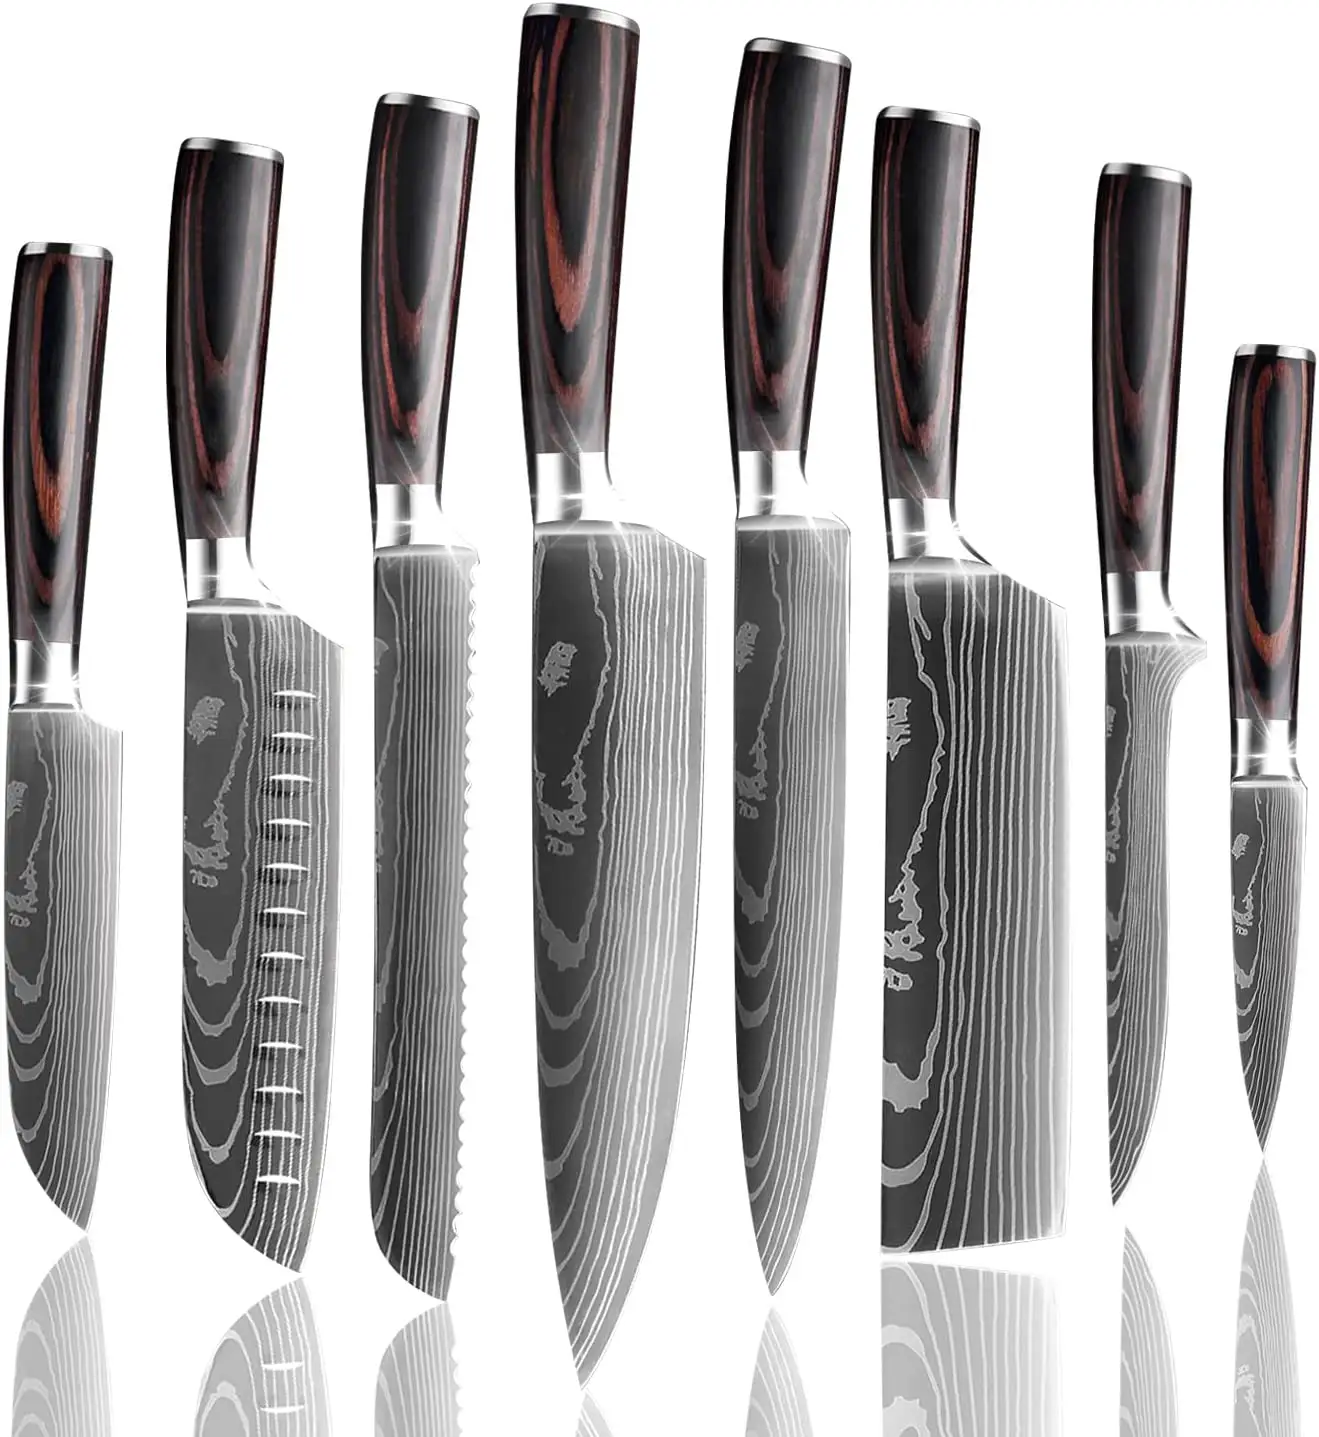 Hot Sell 8 PCS Knifes Set Professional Kitchen Chef Knife Set High-Carbon Stainless Steel Chef Knife Set